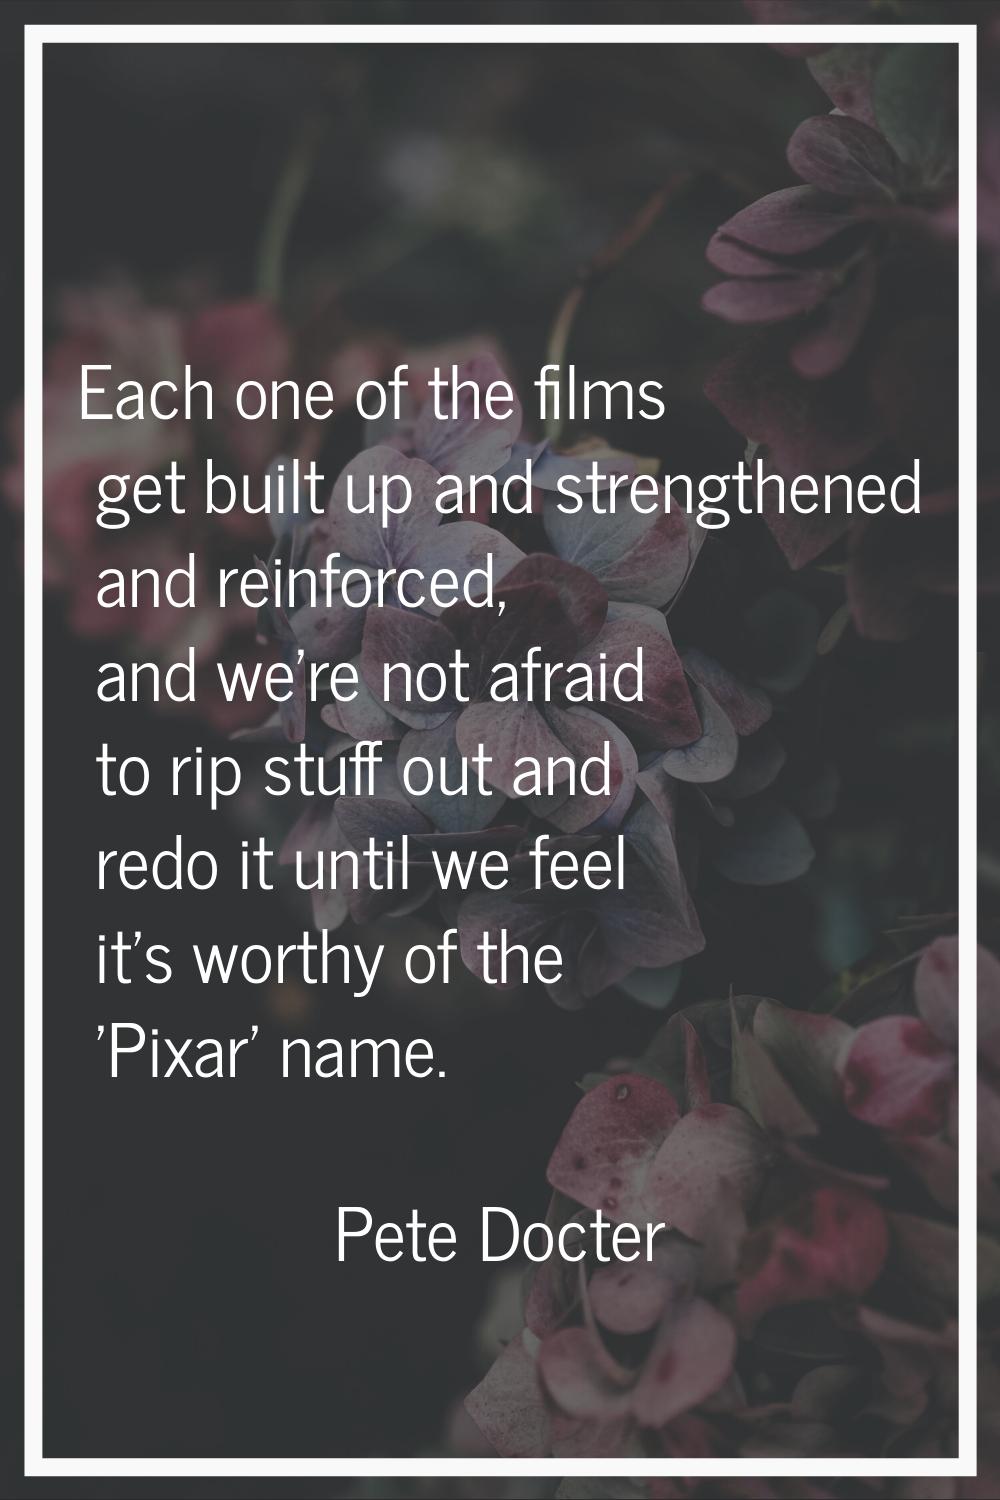 Each one of the films get built up and strengthened and reinforced, and we're not afraid to rip stu